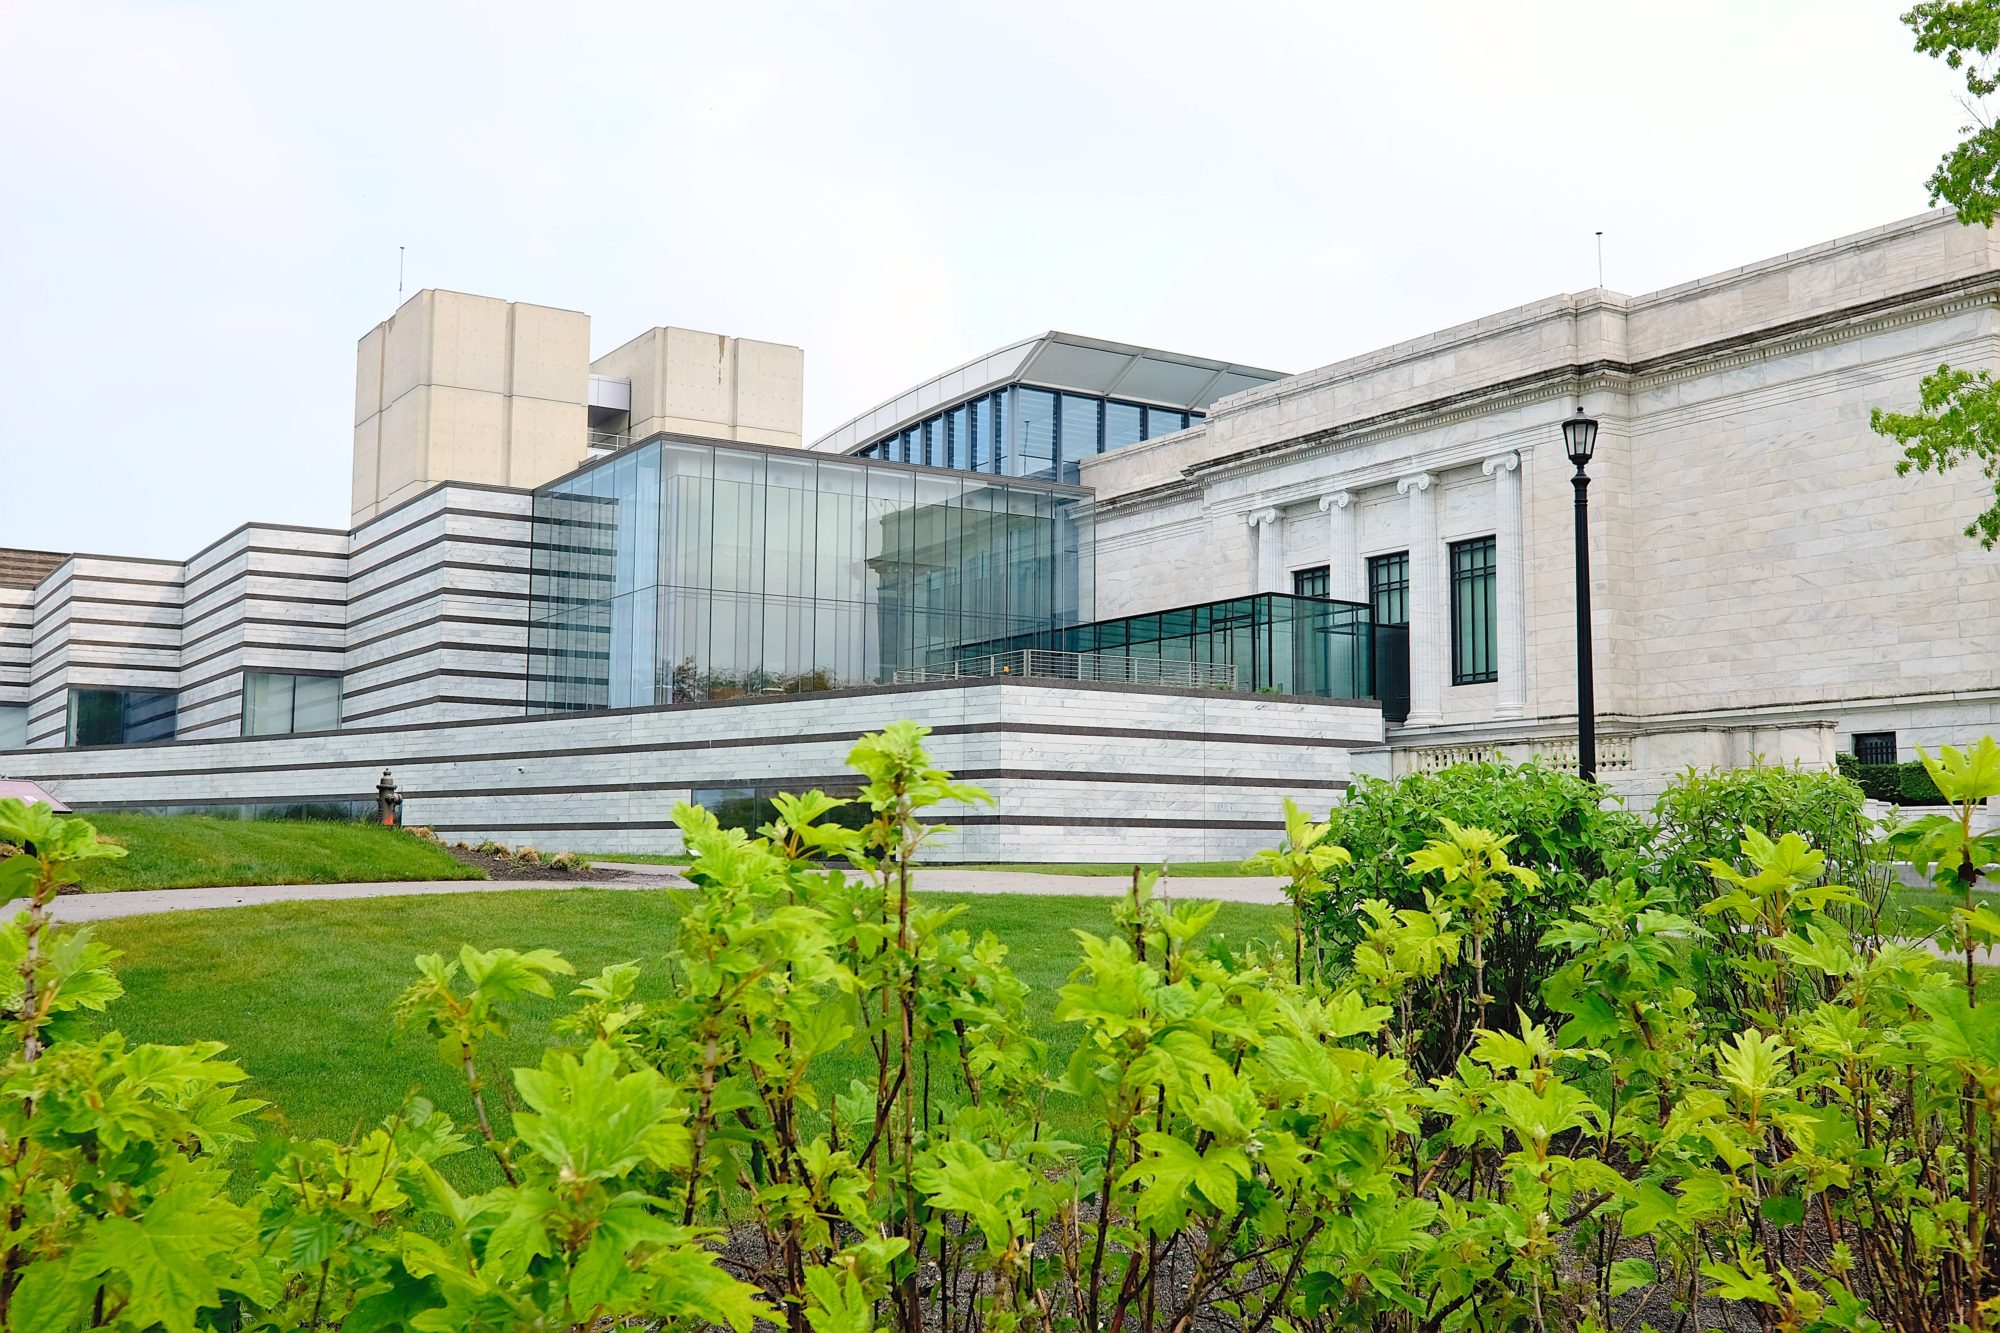 Exterior of The Cleveland Museum of Art